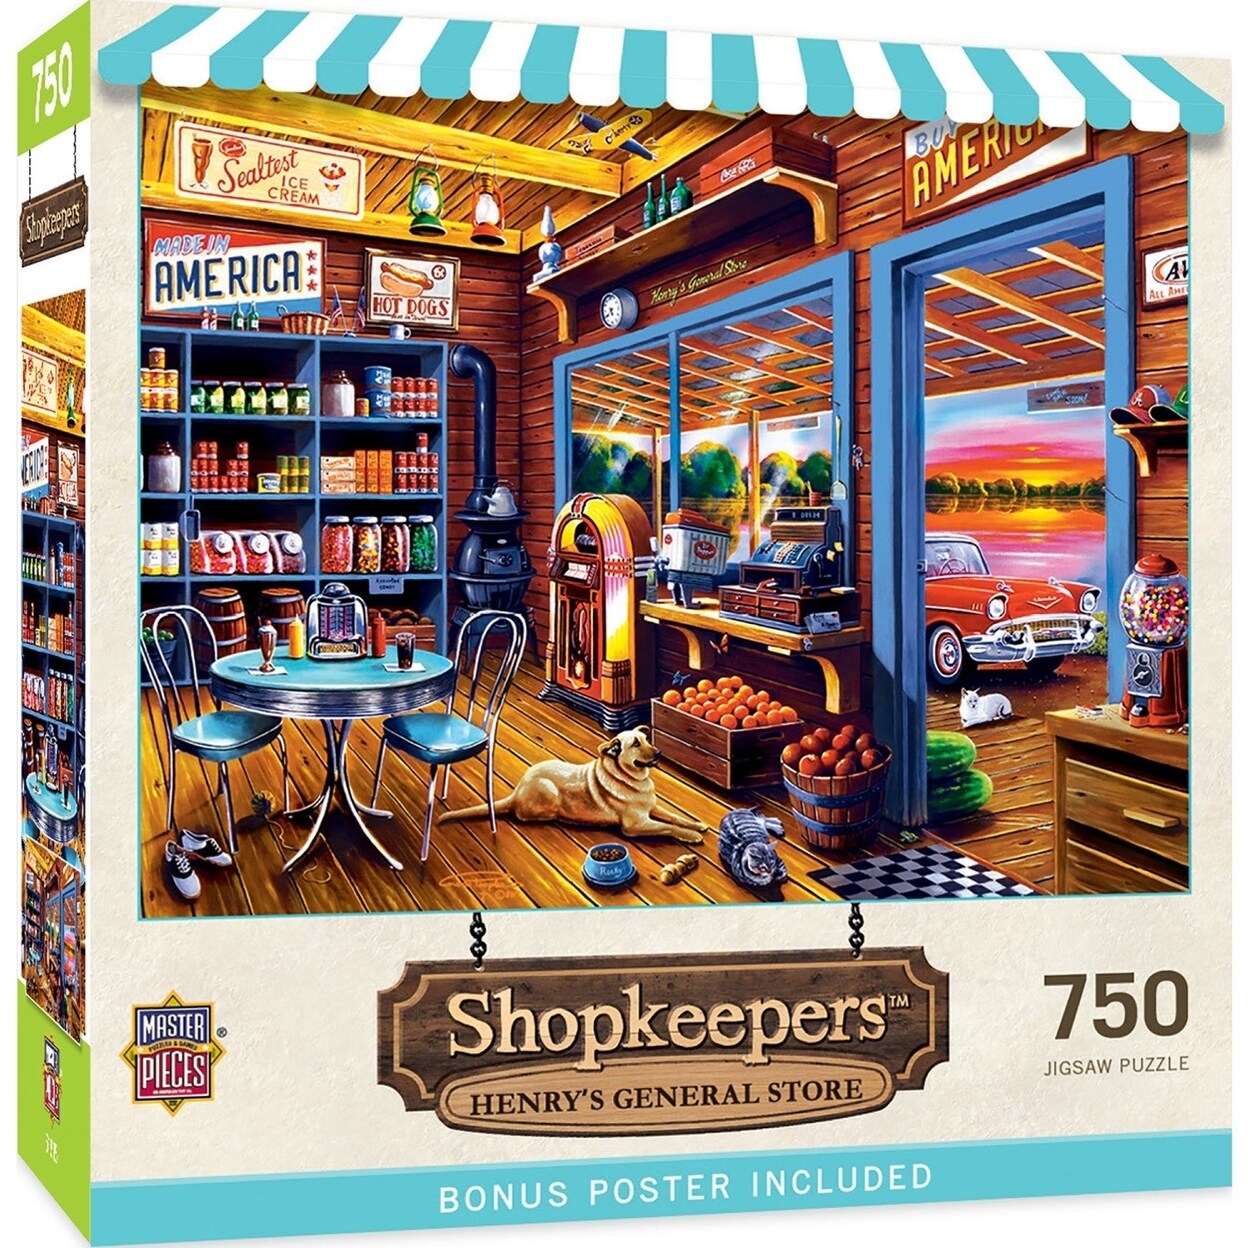 MasterPieces Shopkeepers - Henrys General Store 750 Piece Jigsaw Puzzle ...